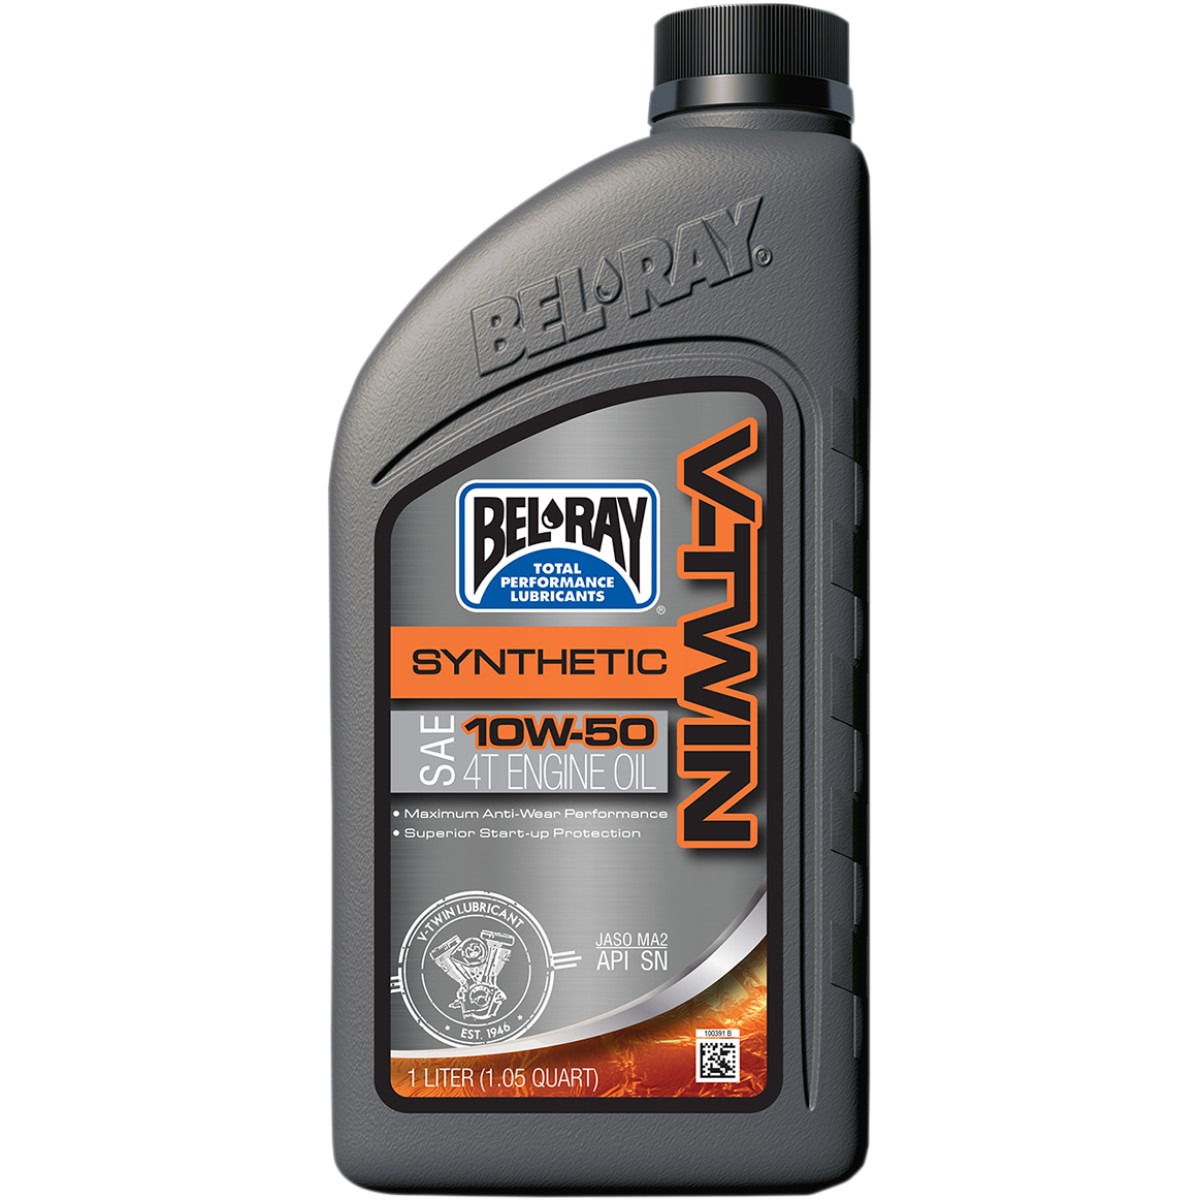 Bel-Ray V-Twin Engine Oil Synthetic 10W50, 1L